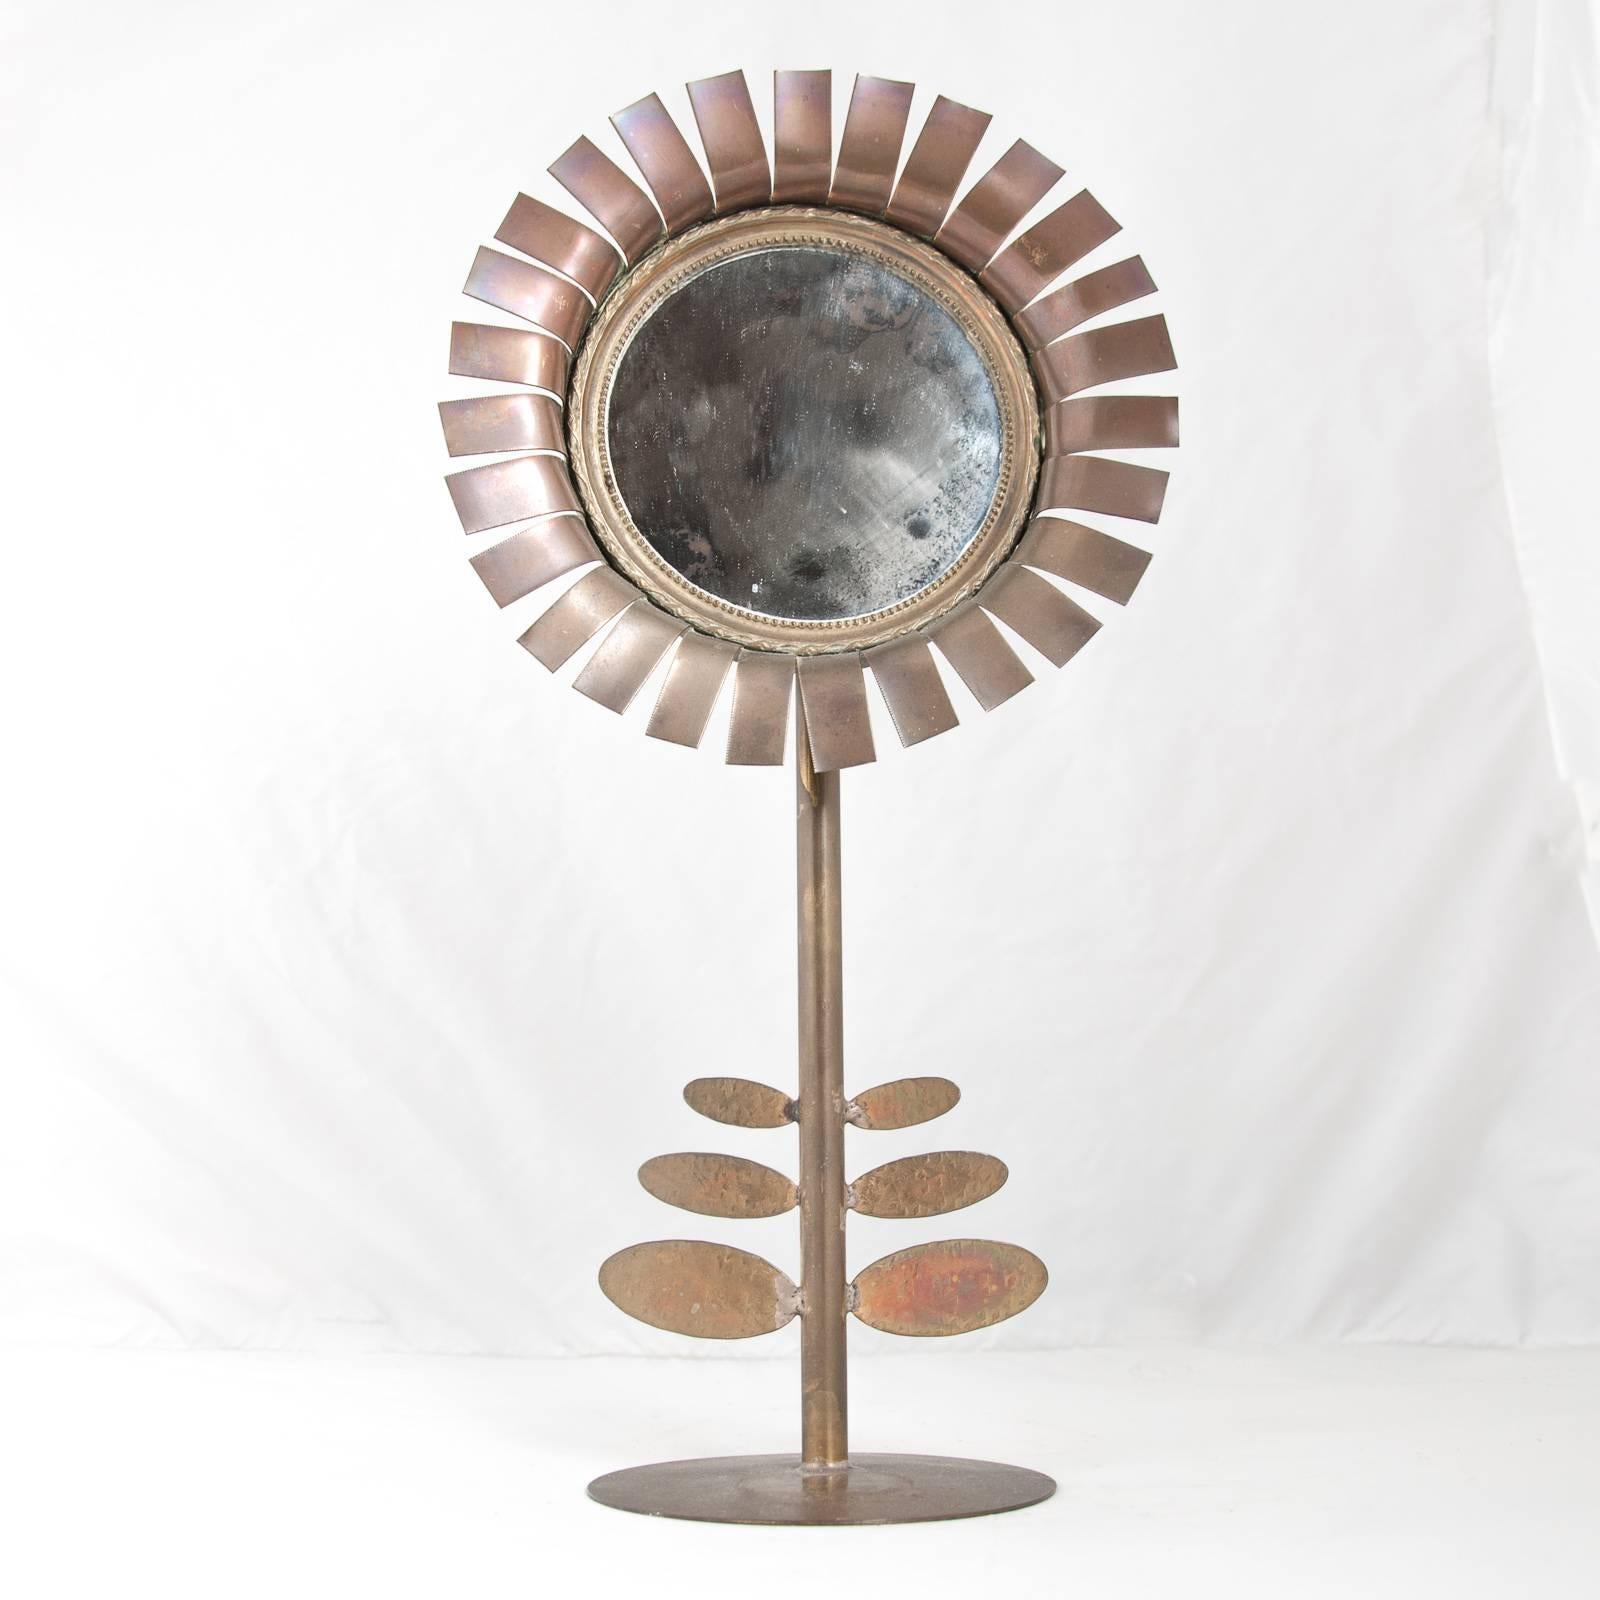 Charming 1970s brass “Daisy” mirror by Chaty, Vallauris, France.